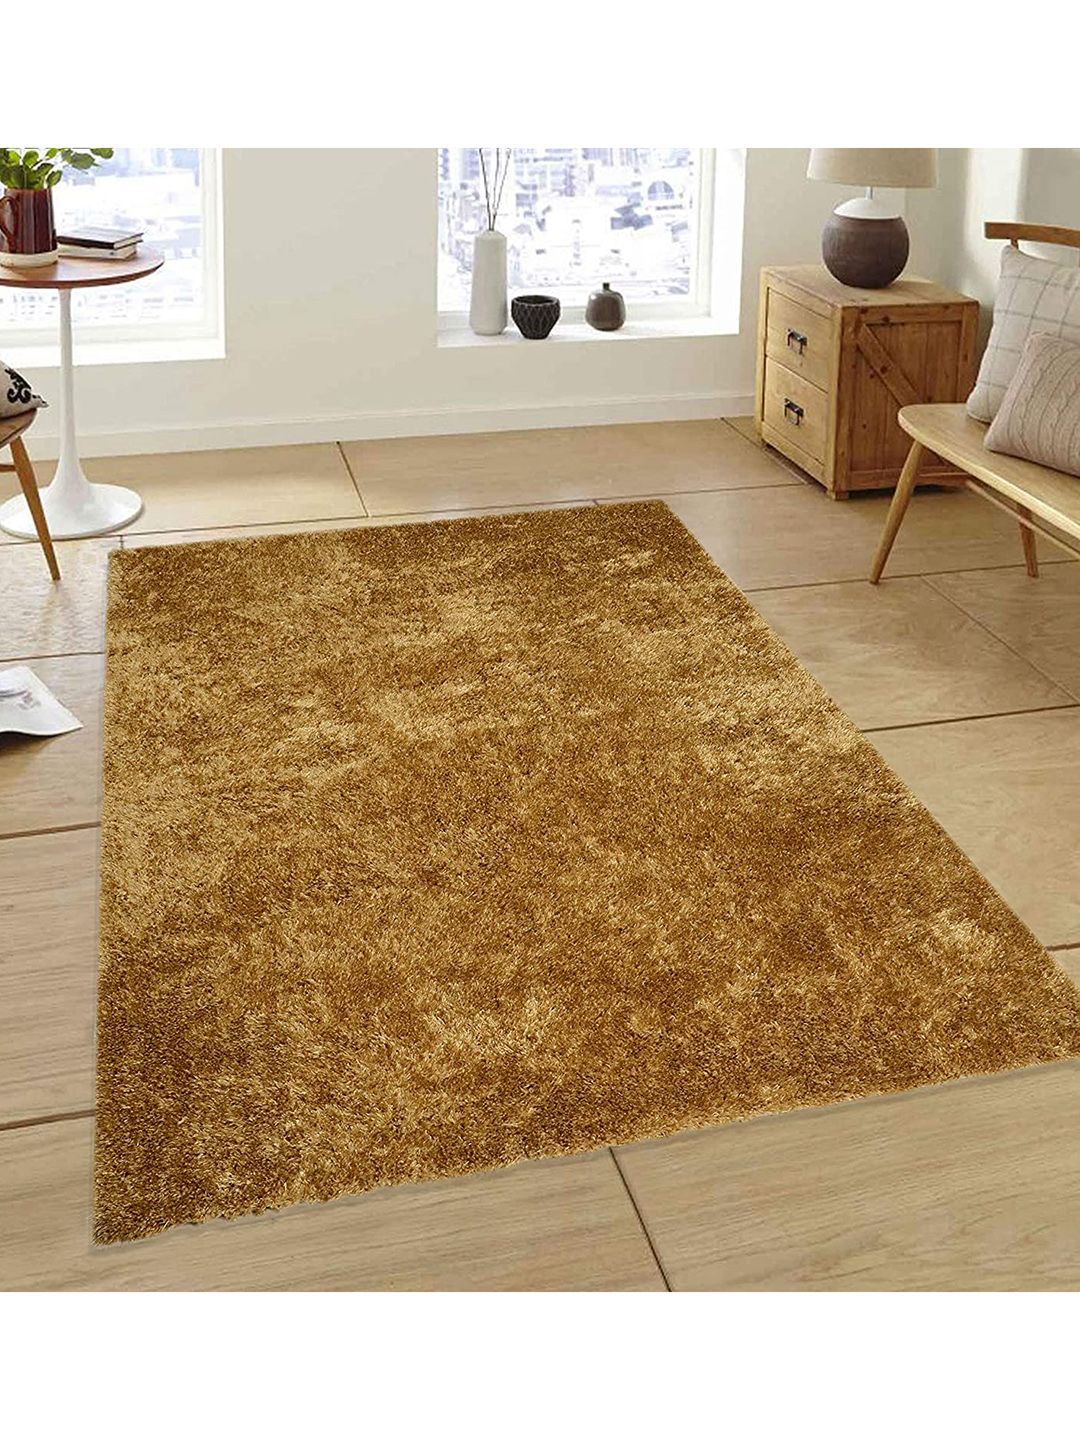 Saral Home Gold-Coloured Solid Cotton Shaggy Carpet Price in India